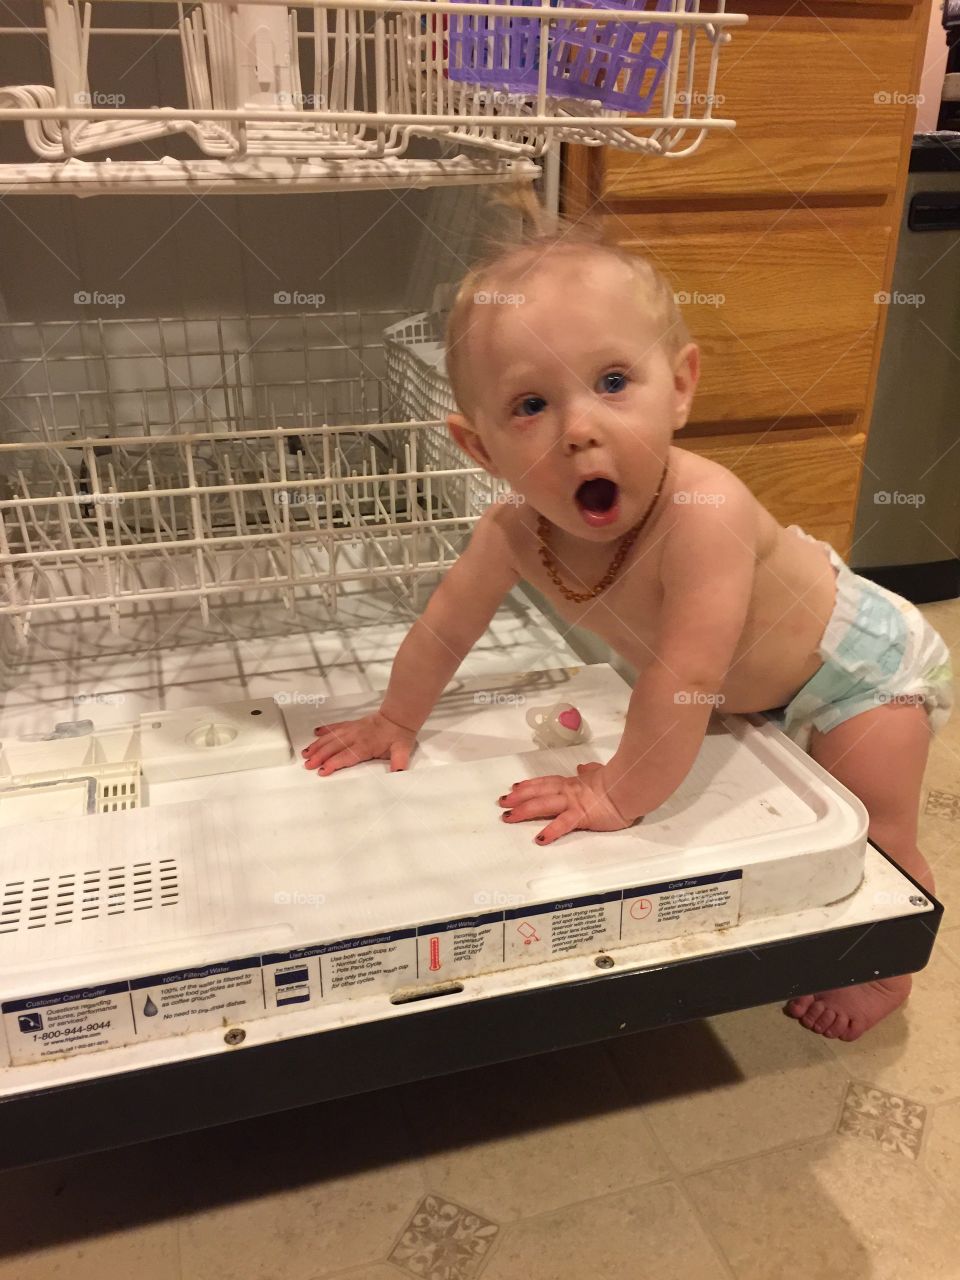 oh... “im not playing in the dishwasher “